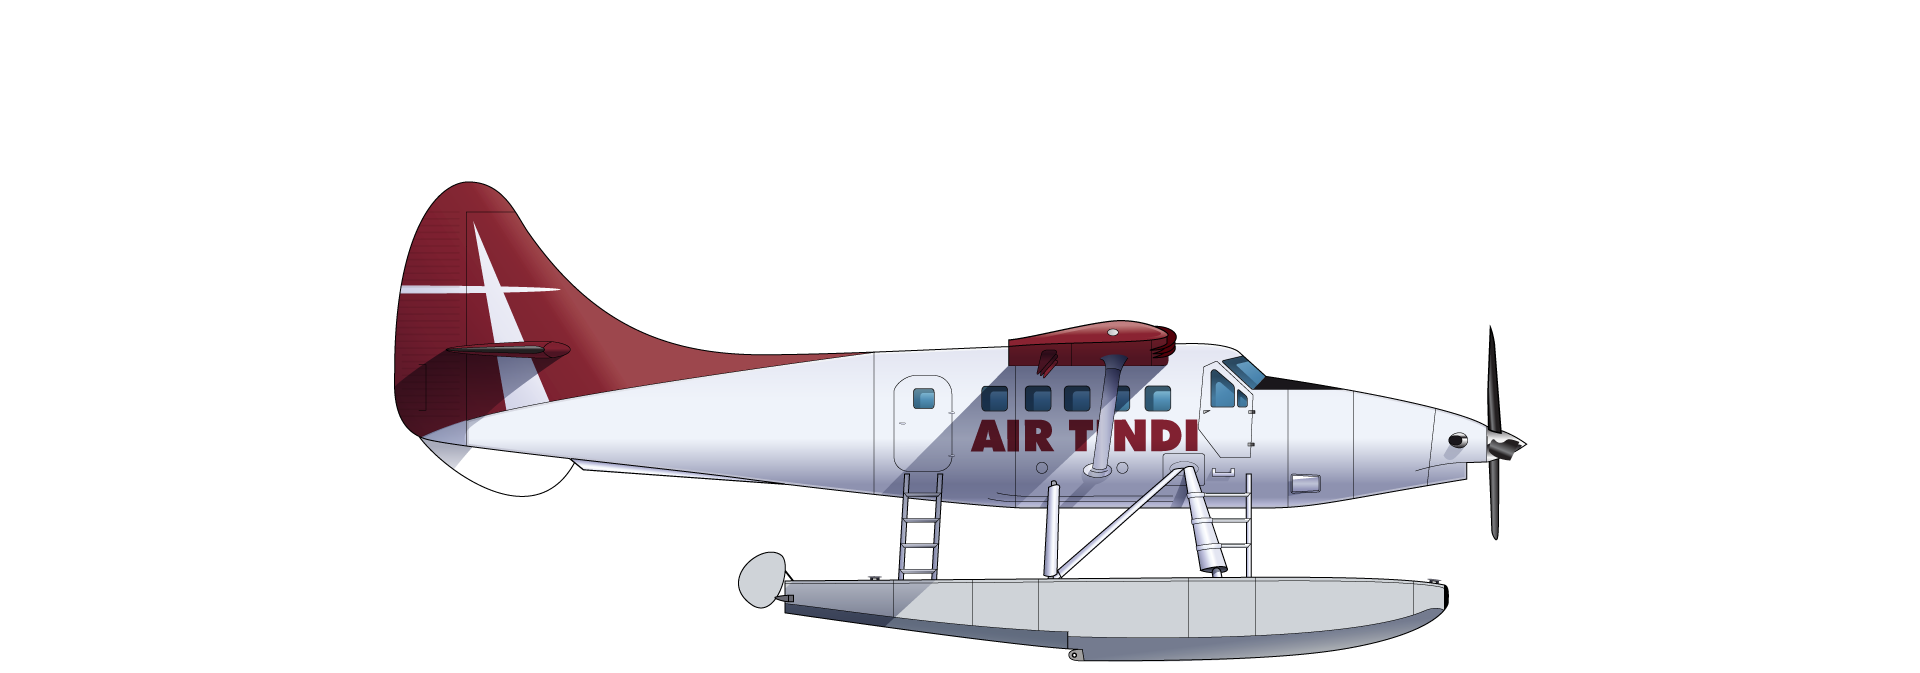 dh3_airtindi_plane_float_proportion2